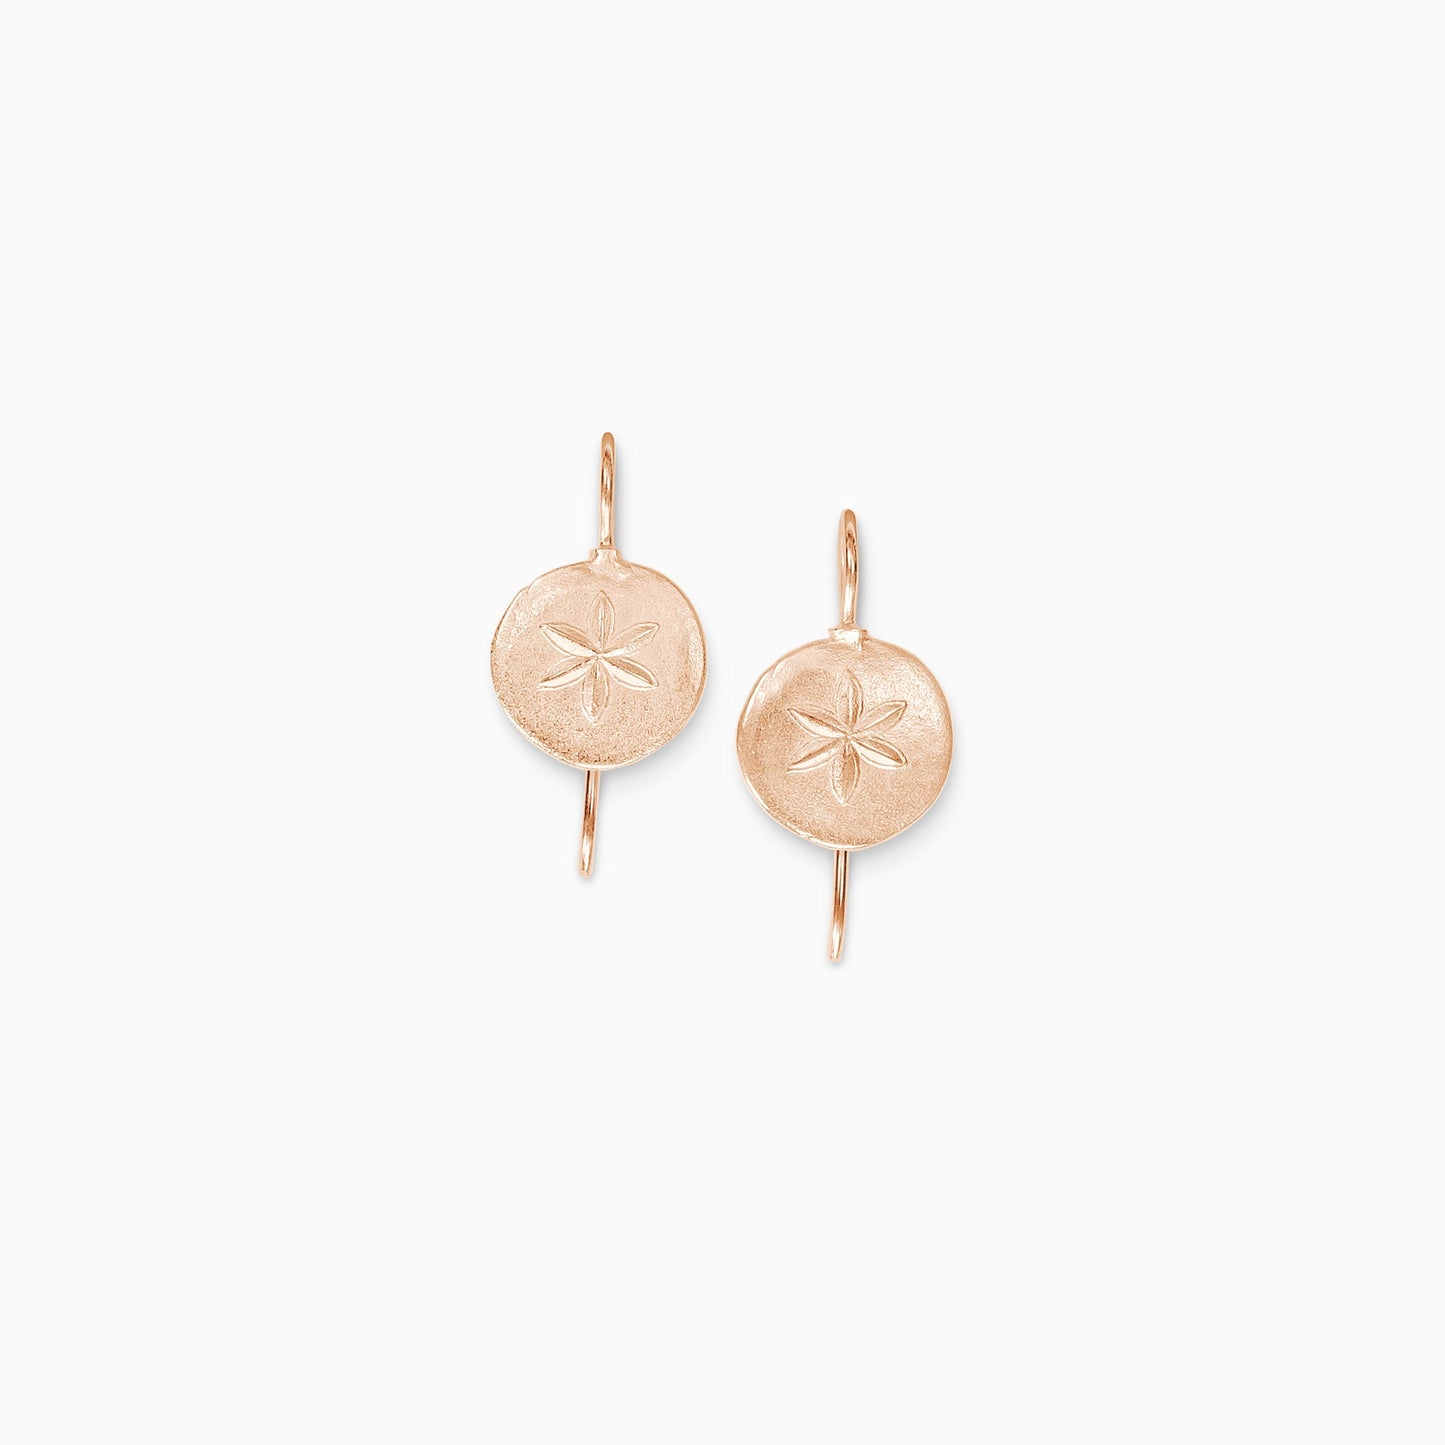 A pair of 18ct Fairtrade rose gold organically circular textured drop earrings .  A six petal flower, similar to a silver dollar is embossed in the centre of the earring which is fastened with a hook. 25mm length, 14mm diameter